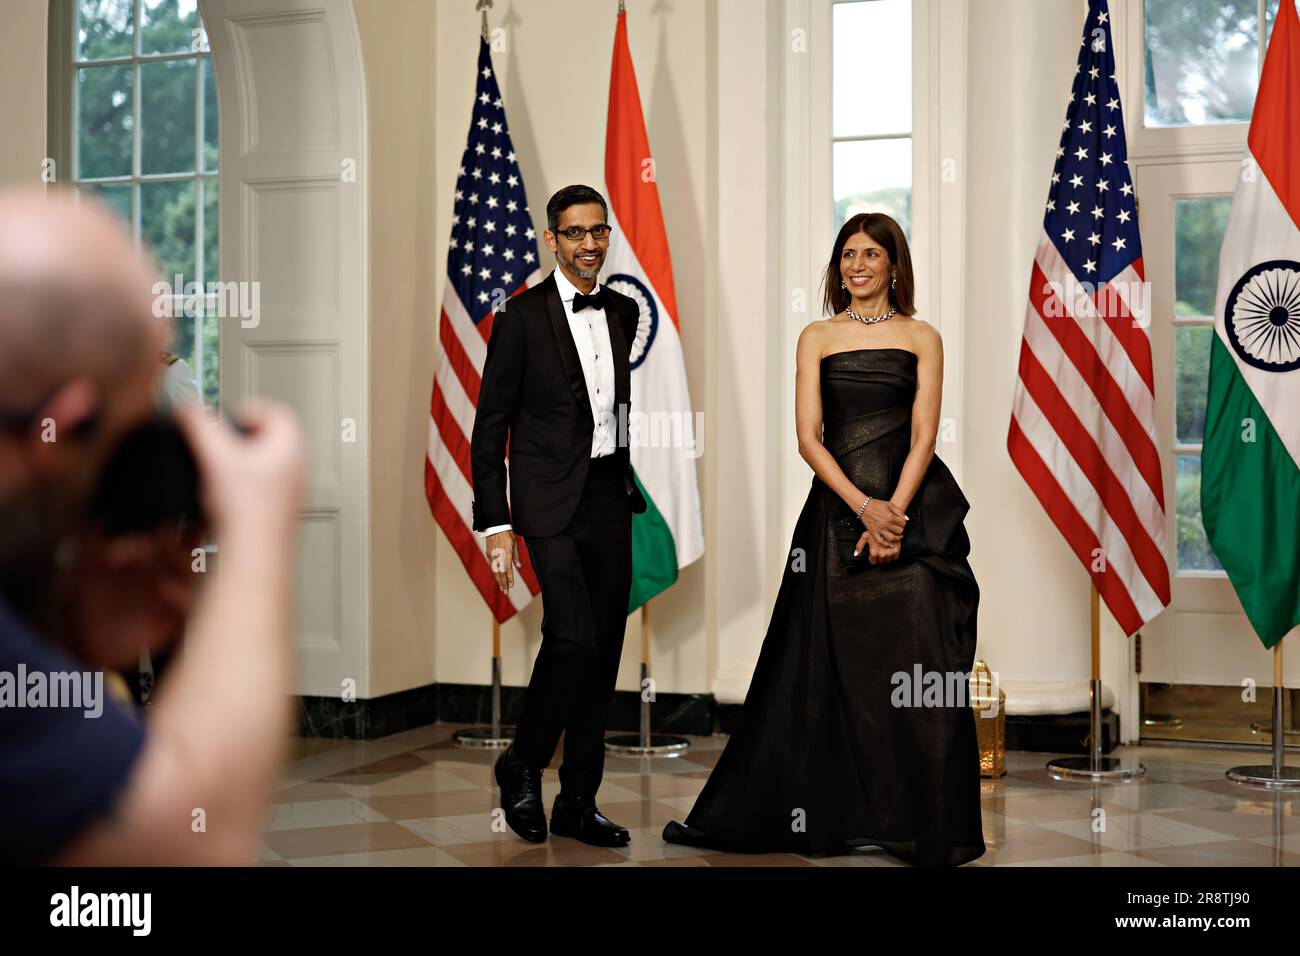 Washington, United States. 22nd June, 2023. Sundar Pichai, chief executive officer of Alphabet Inc., left, and Anjali Pichai arrive to attend a state dinner in honor of Indian Prime Minister Narendra Modi hosted by US President Joe Biden and First Lady Jill Biden at the White House in Washington, DC, US, on Thursday, June 22, 2023. Biden and Modi announced a series of defense and commercial deals designed to improve military and economic ties between their nations during a state visit at the White House today. Photographer: Ting Shen/Pool/Sipa USA Credit: Sipa USA/Alamy Live News Stock Photo